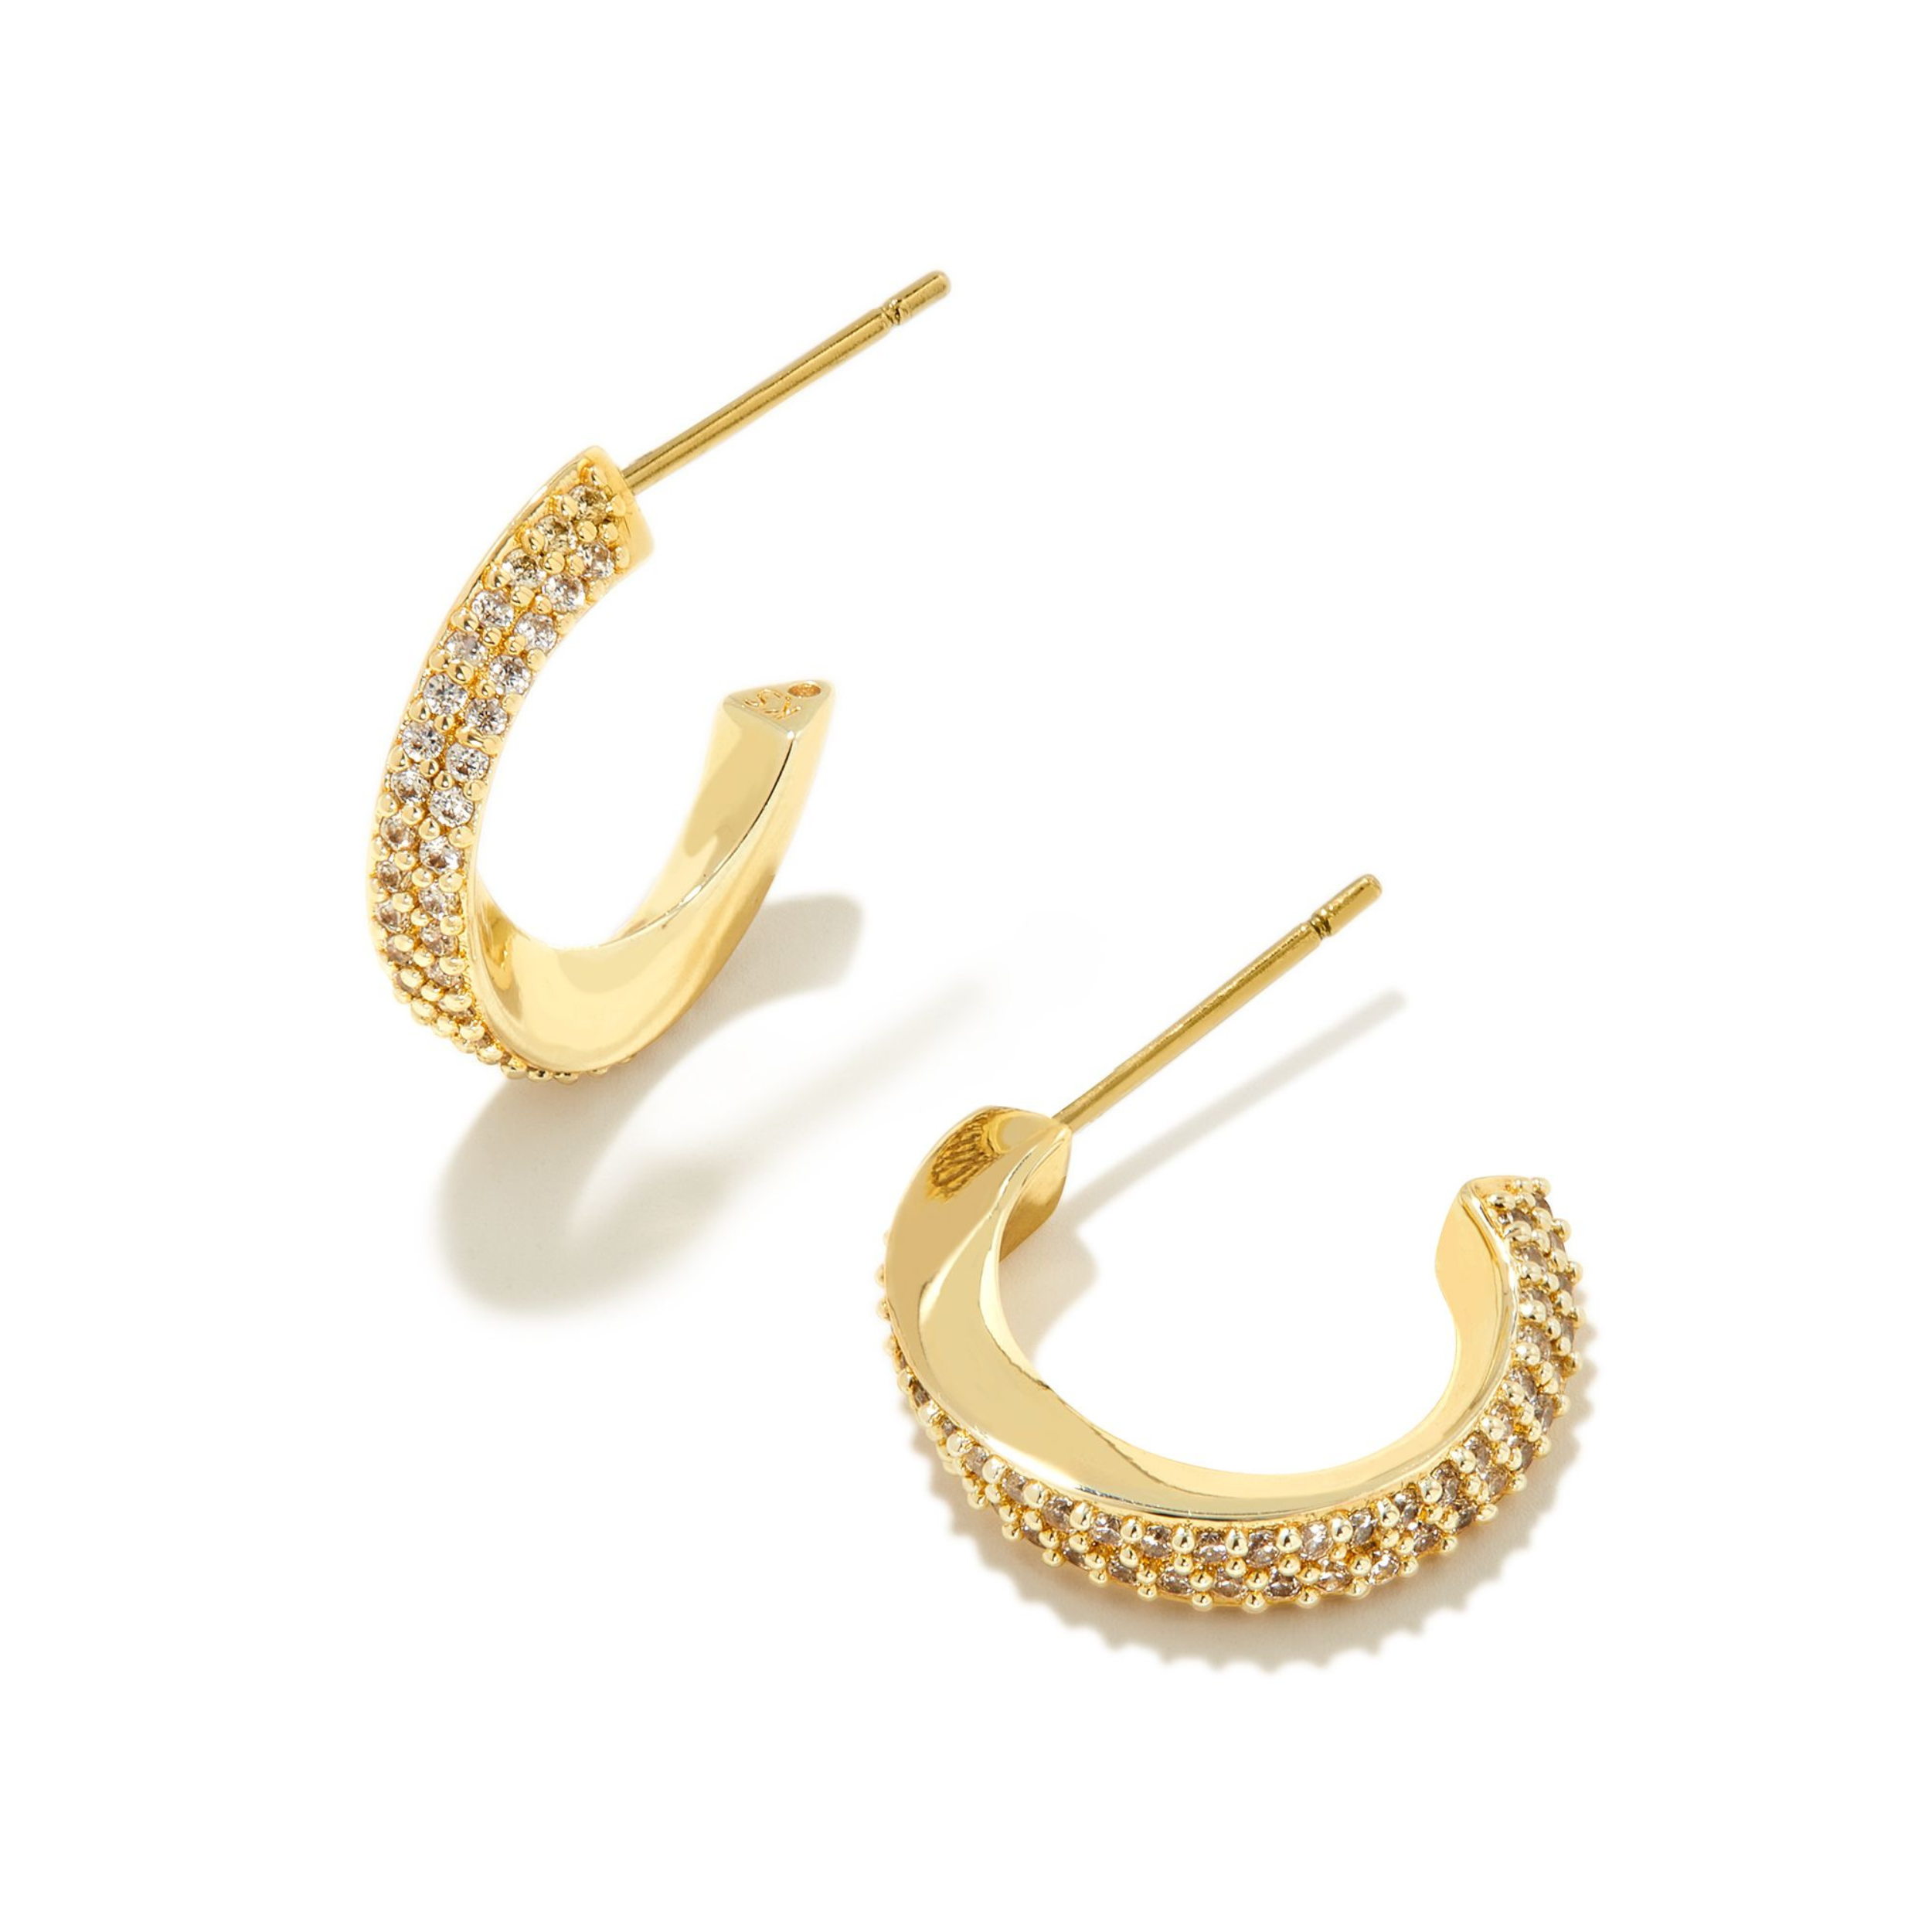 Gold hoop huggie twist earrings with cz crystals pictured on a white background. 